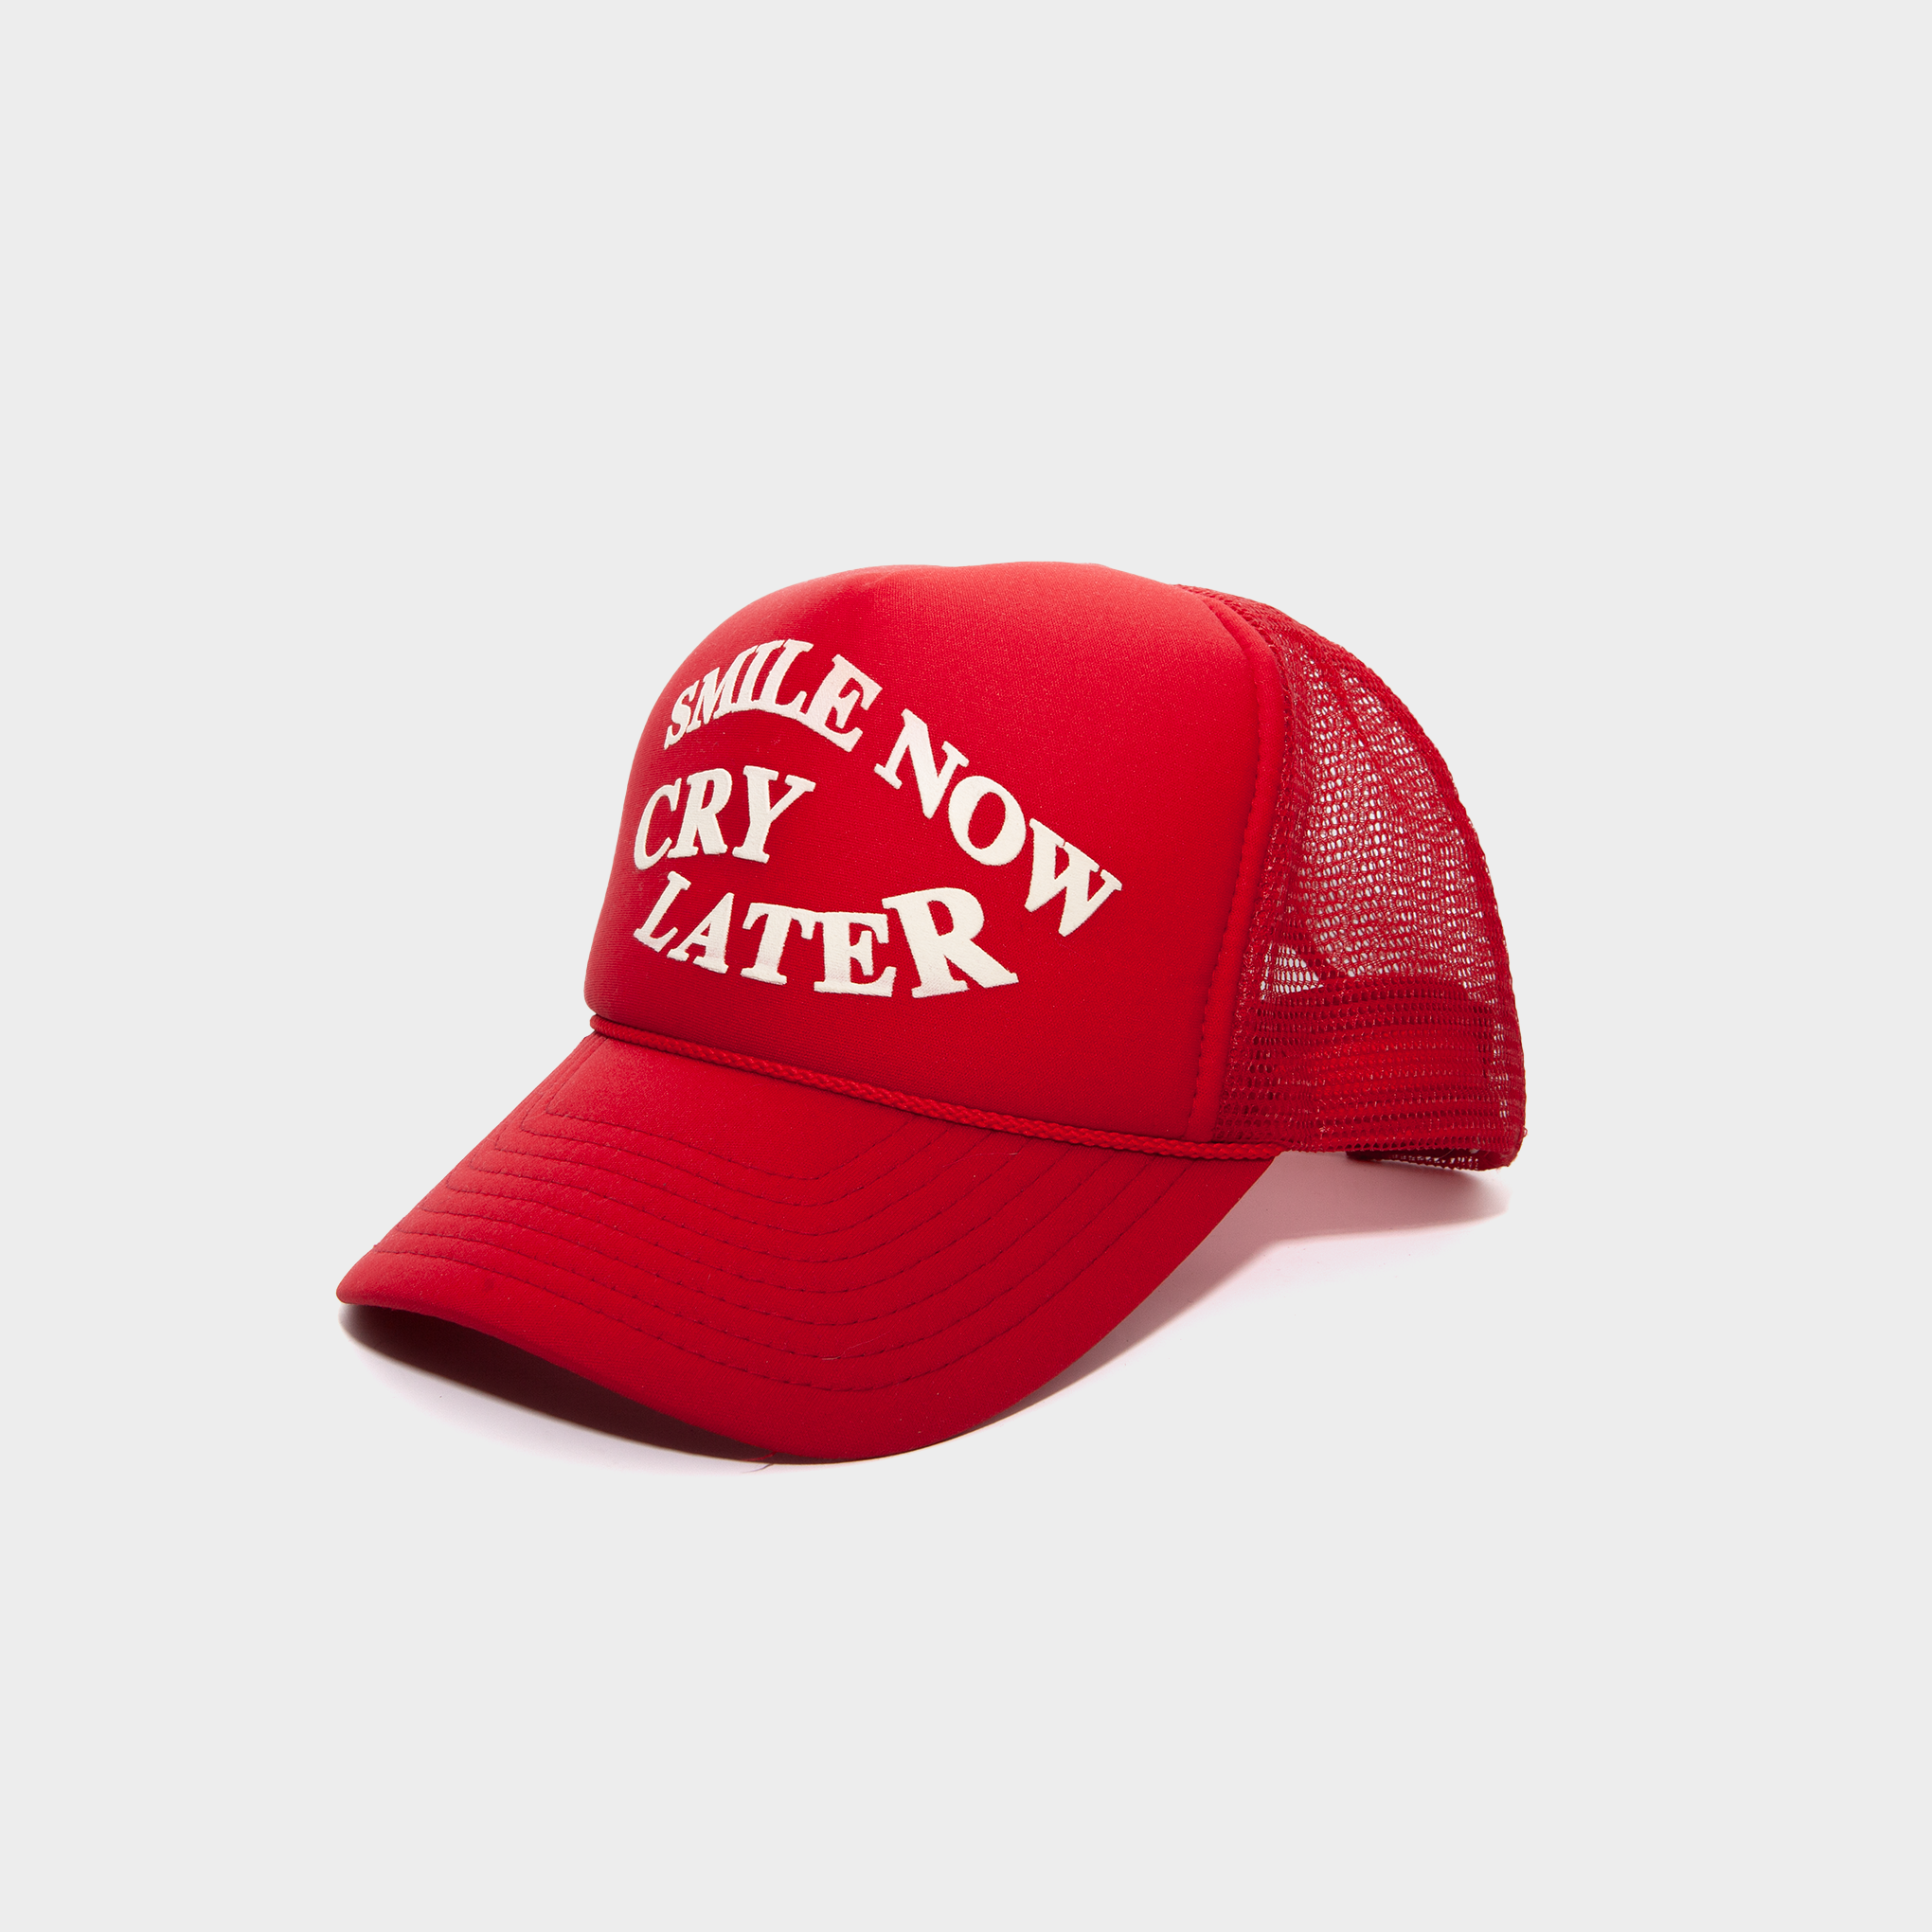 SMILE NOW CRY LATER TRUCKER SNAPBACK [USED]